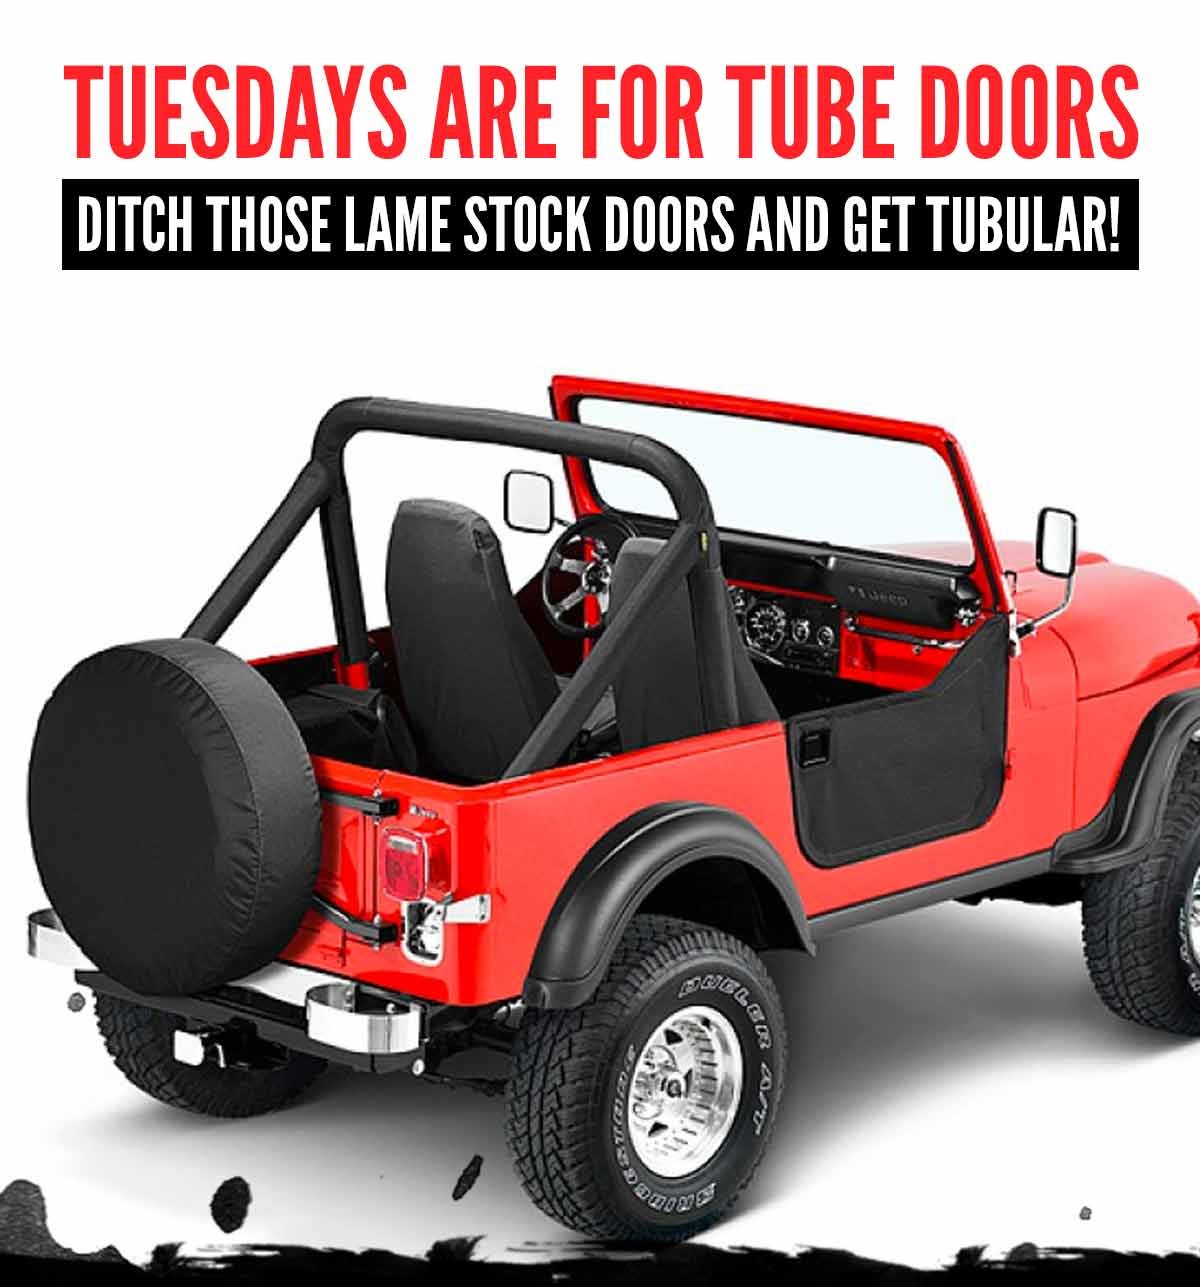 Tuesdays Are For Tube Doors. Ditch Those Lame Stock Doors And Get Tubular!